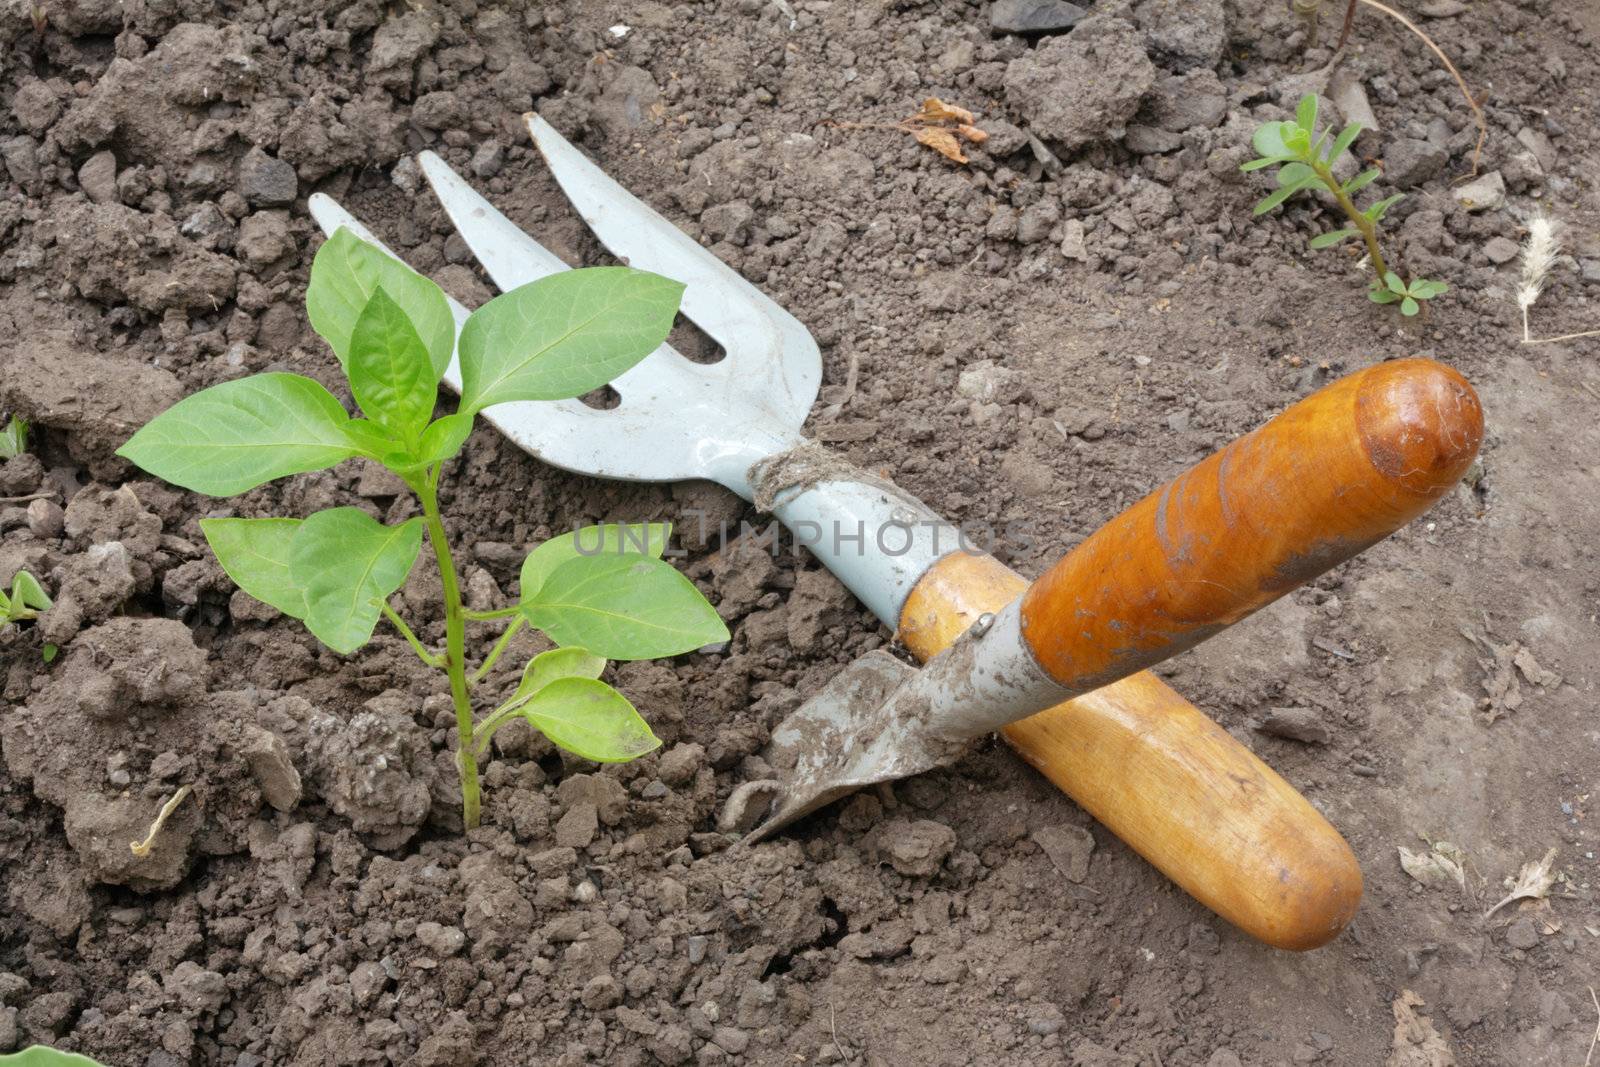 Plant in a garden. A shovel and pitchfork